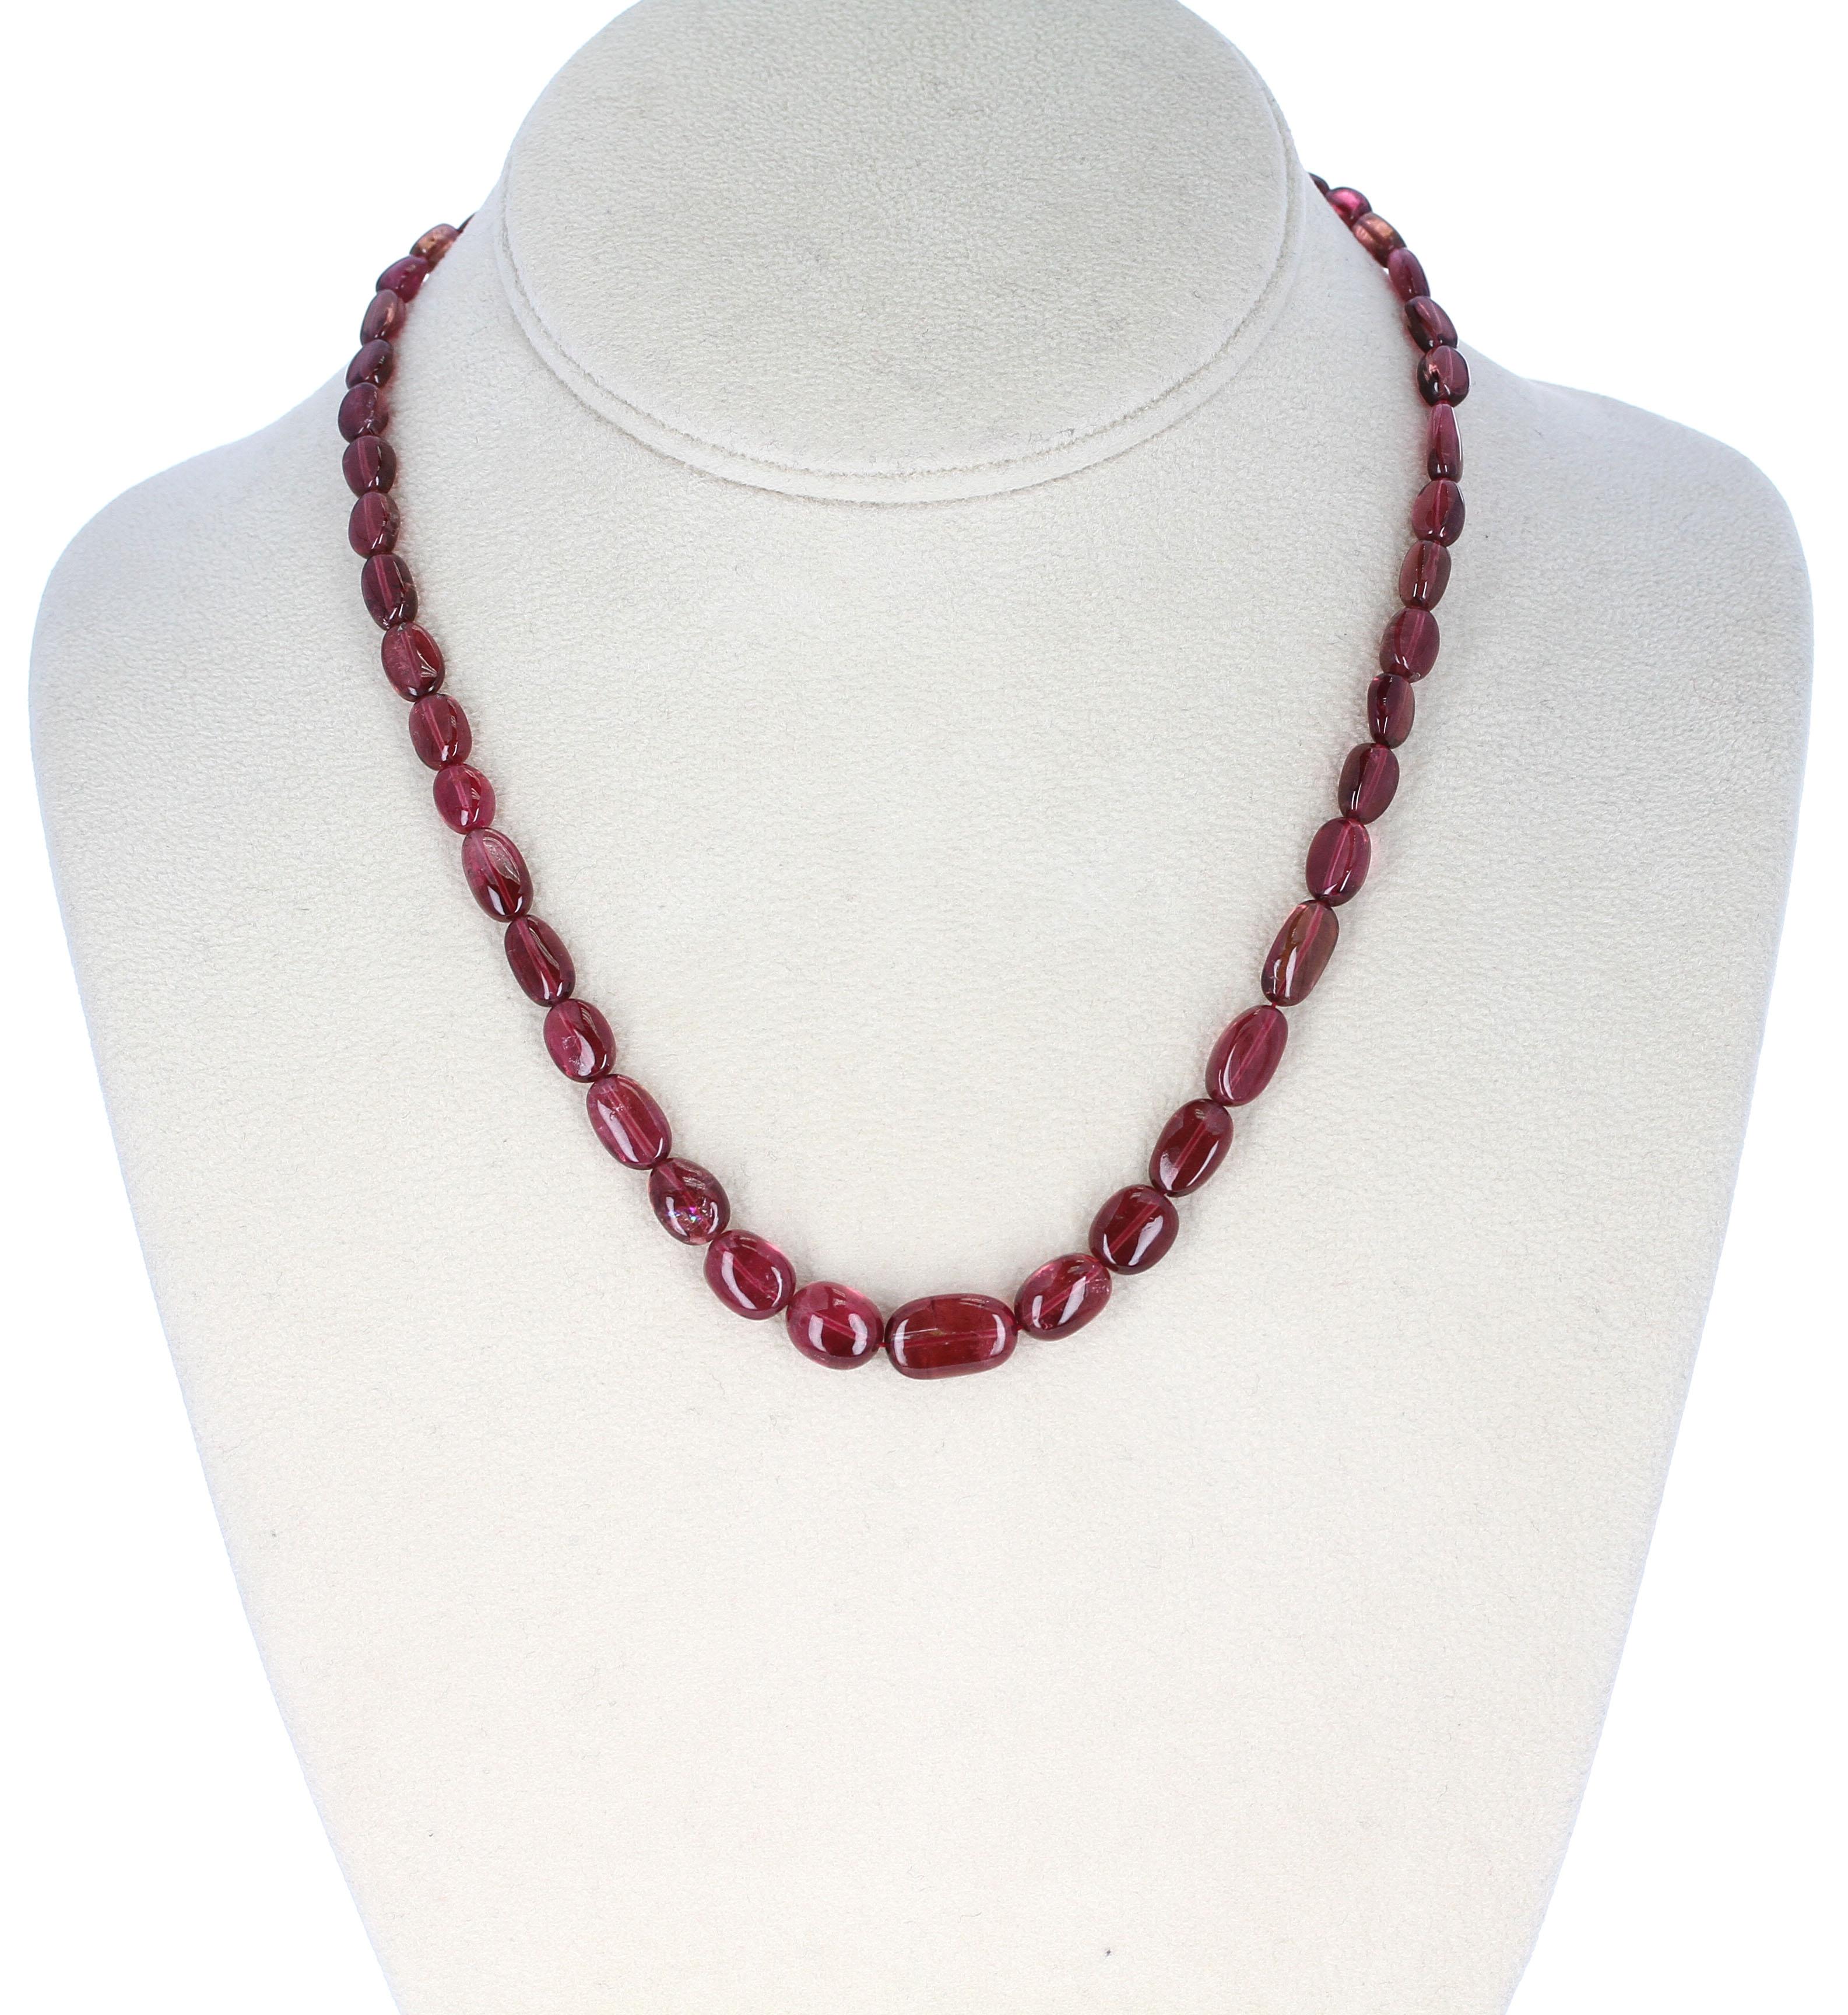 A strand of Tourmaline Smooth Tumbled Beads with a Sterling Silver Toggle Clasp. Length: 17.25